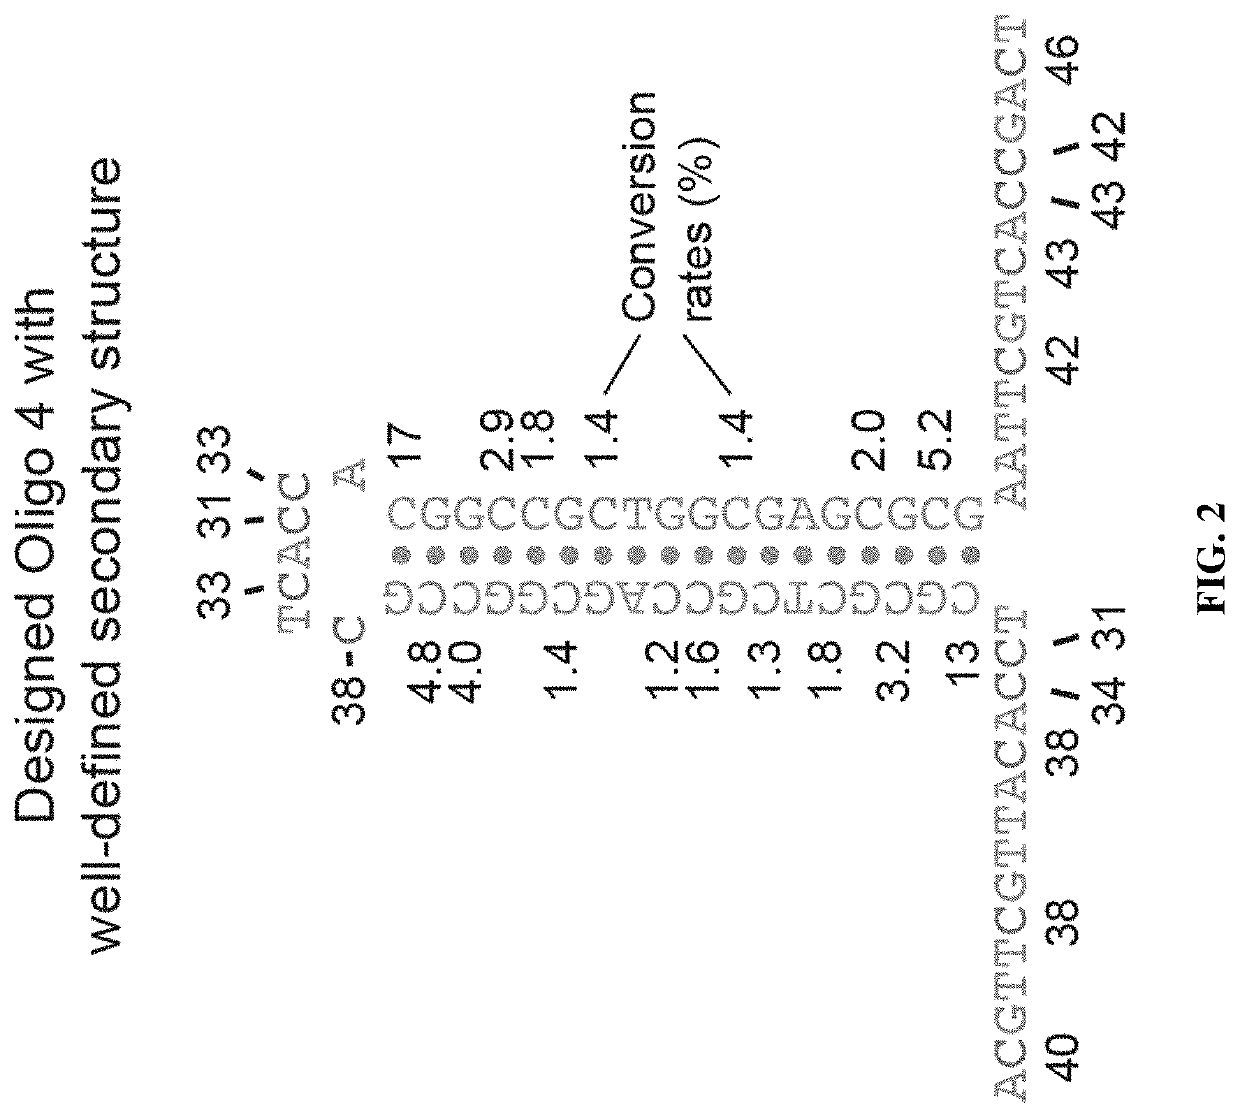 Methods for studying nucleotide accessibility in DNA and RNA based on low-yield bisulfite conversion and next-generation sequencing